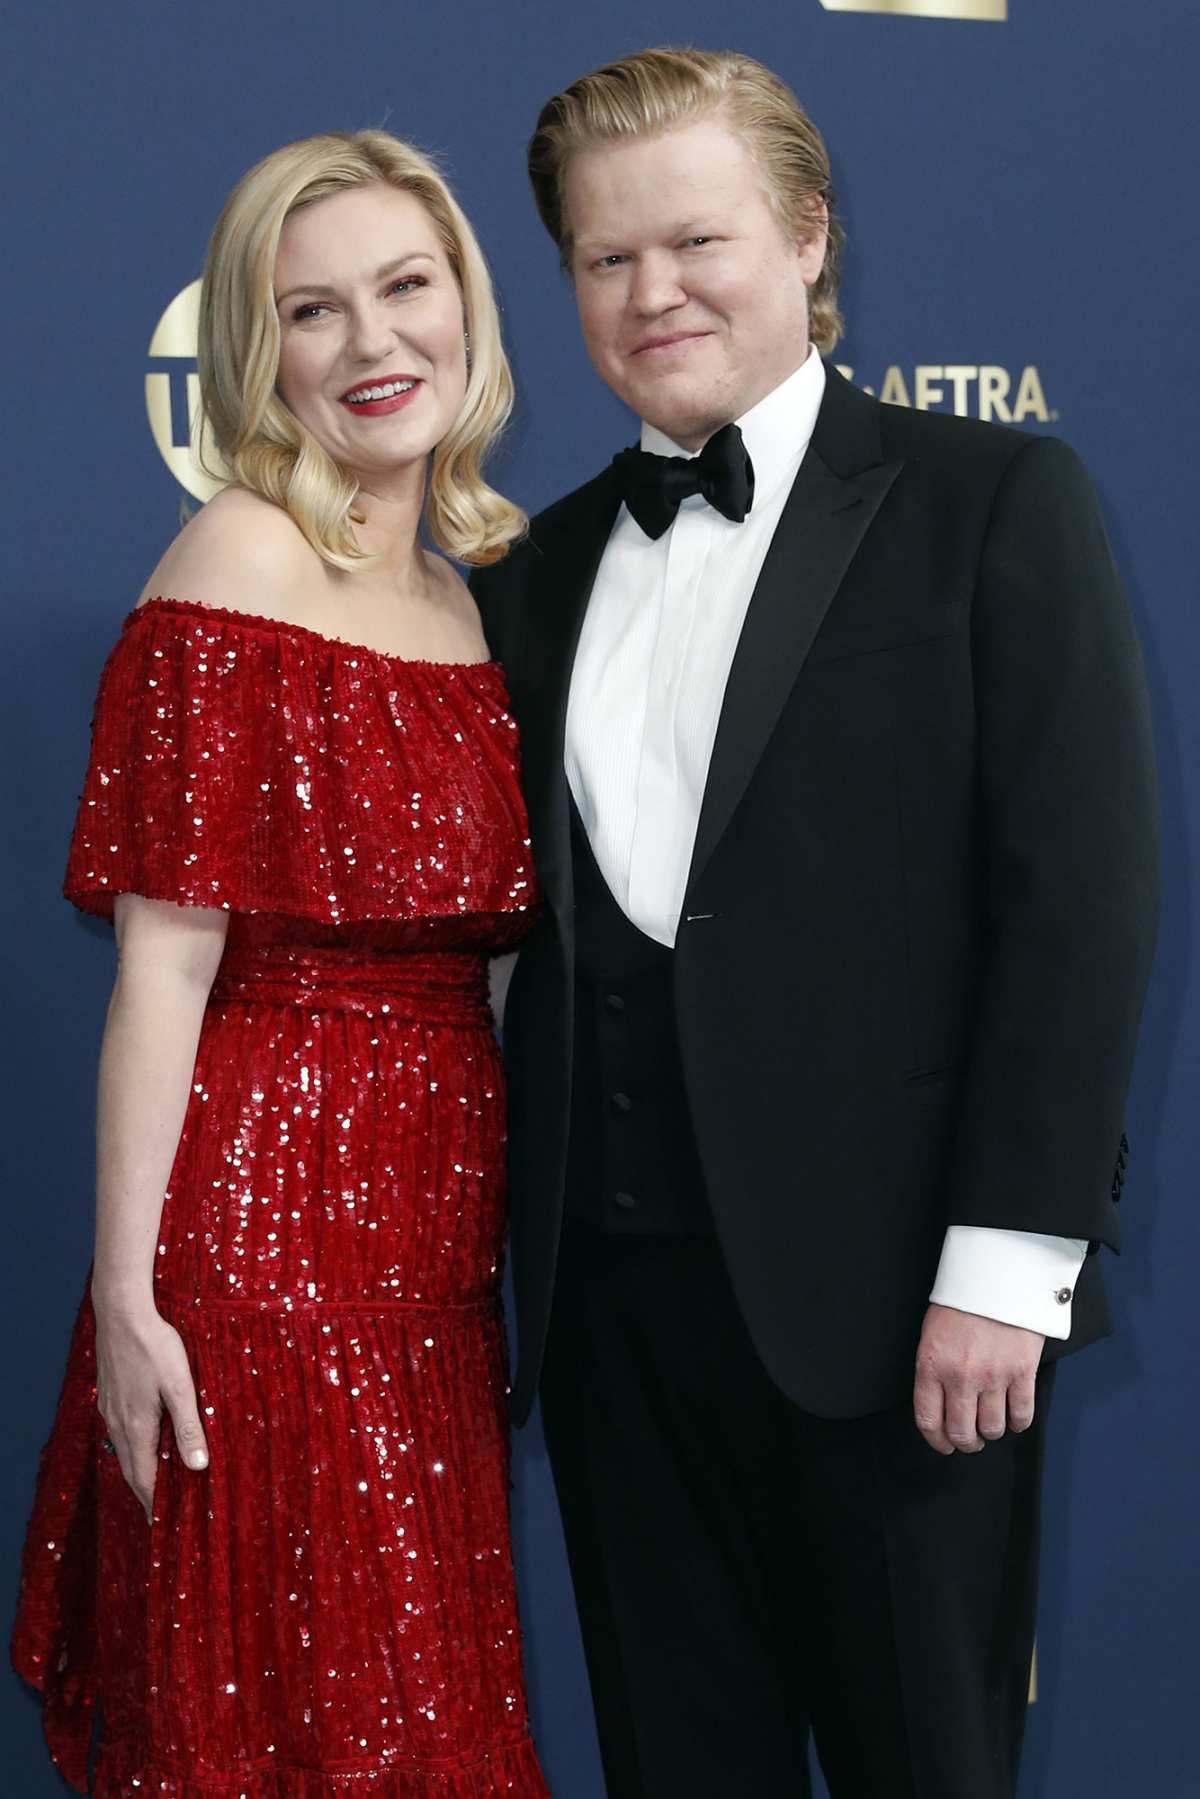 SAG Awards 2022 Kirsten Dunst and Jesse Plemons, More of the Hottest Couples on the Red Carpet